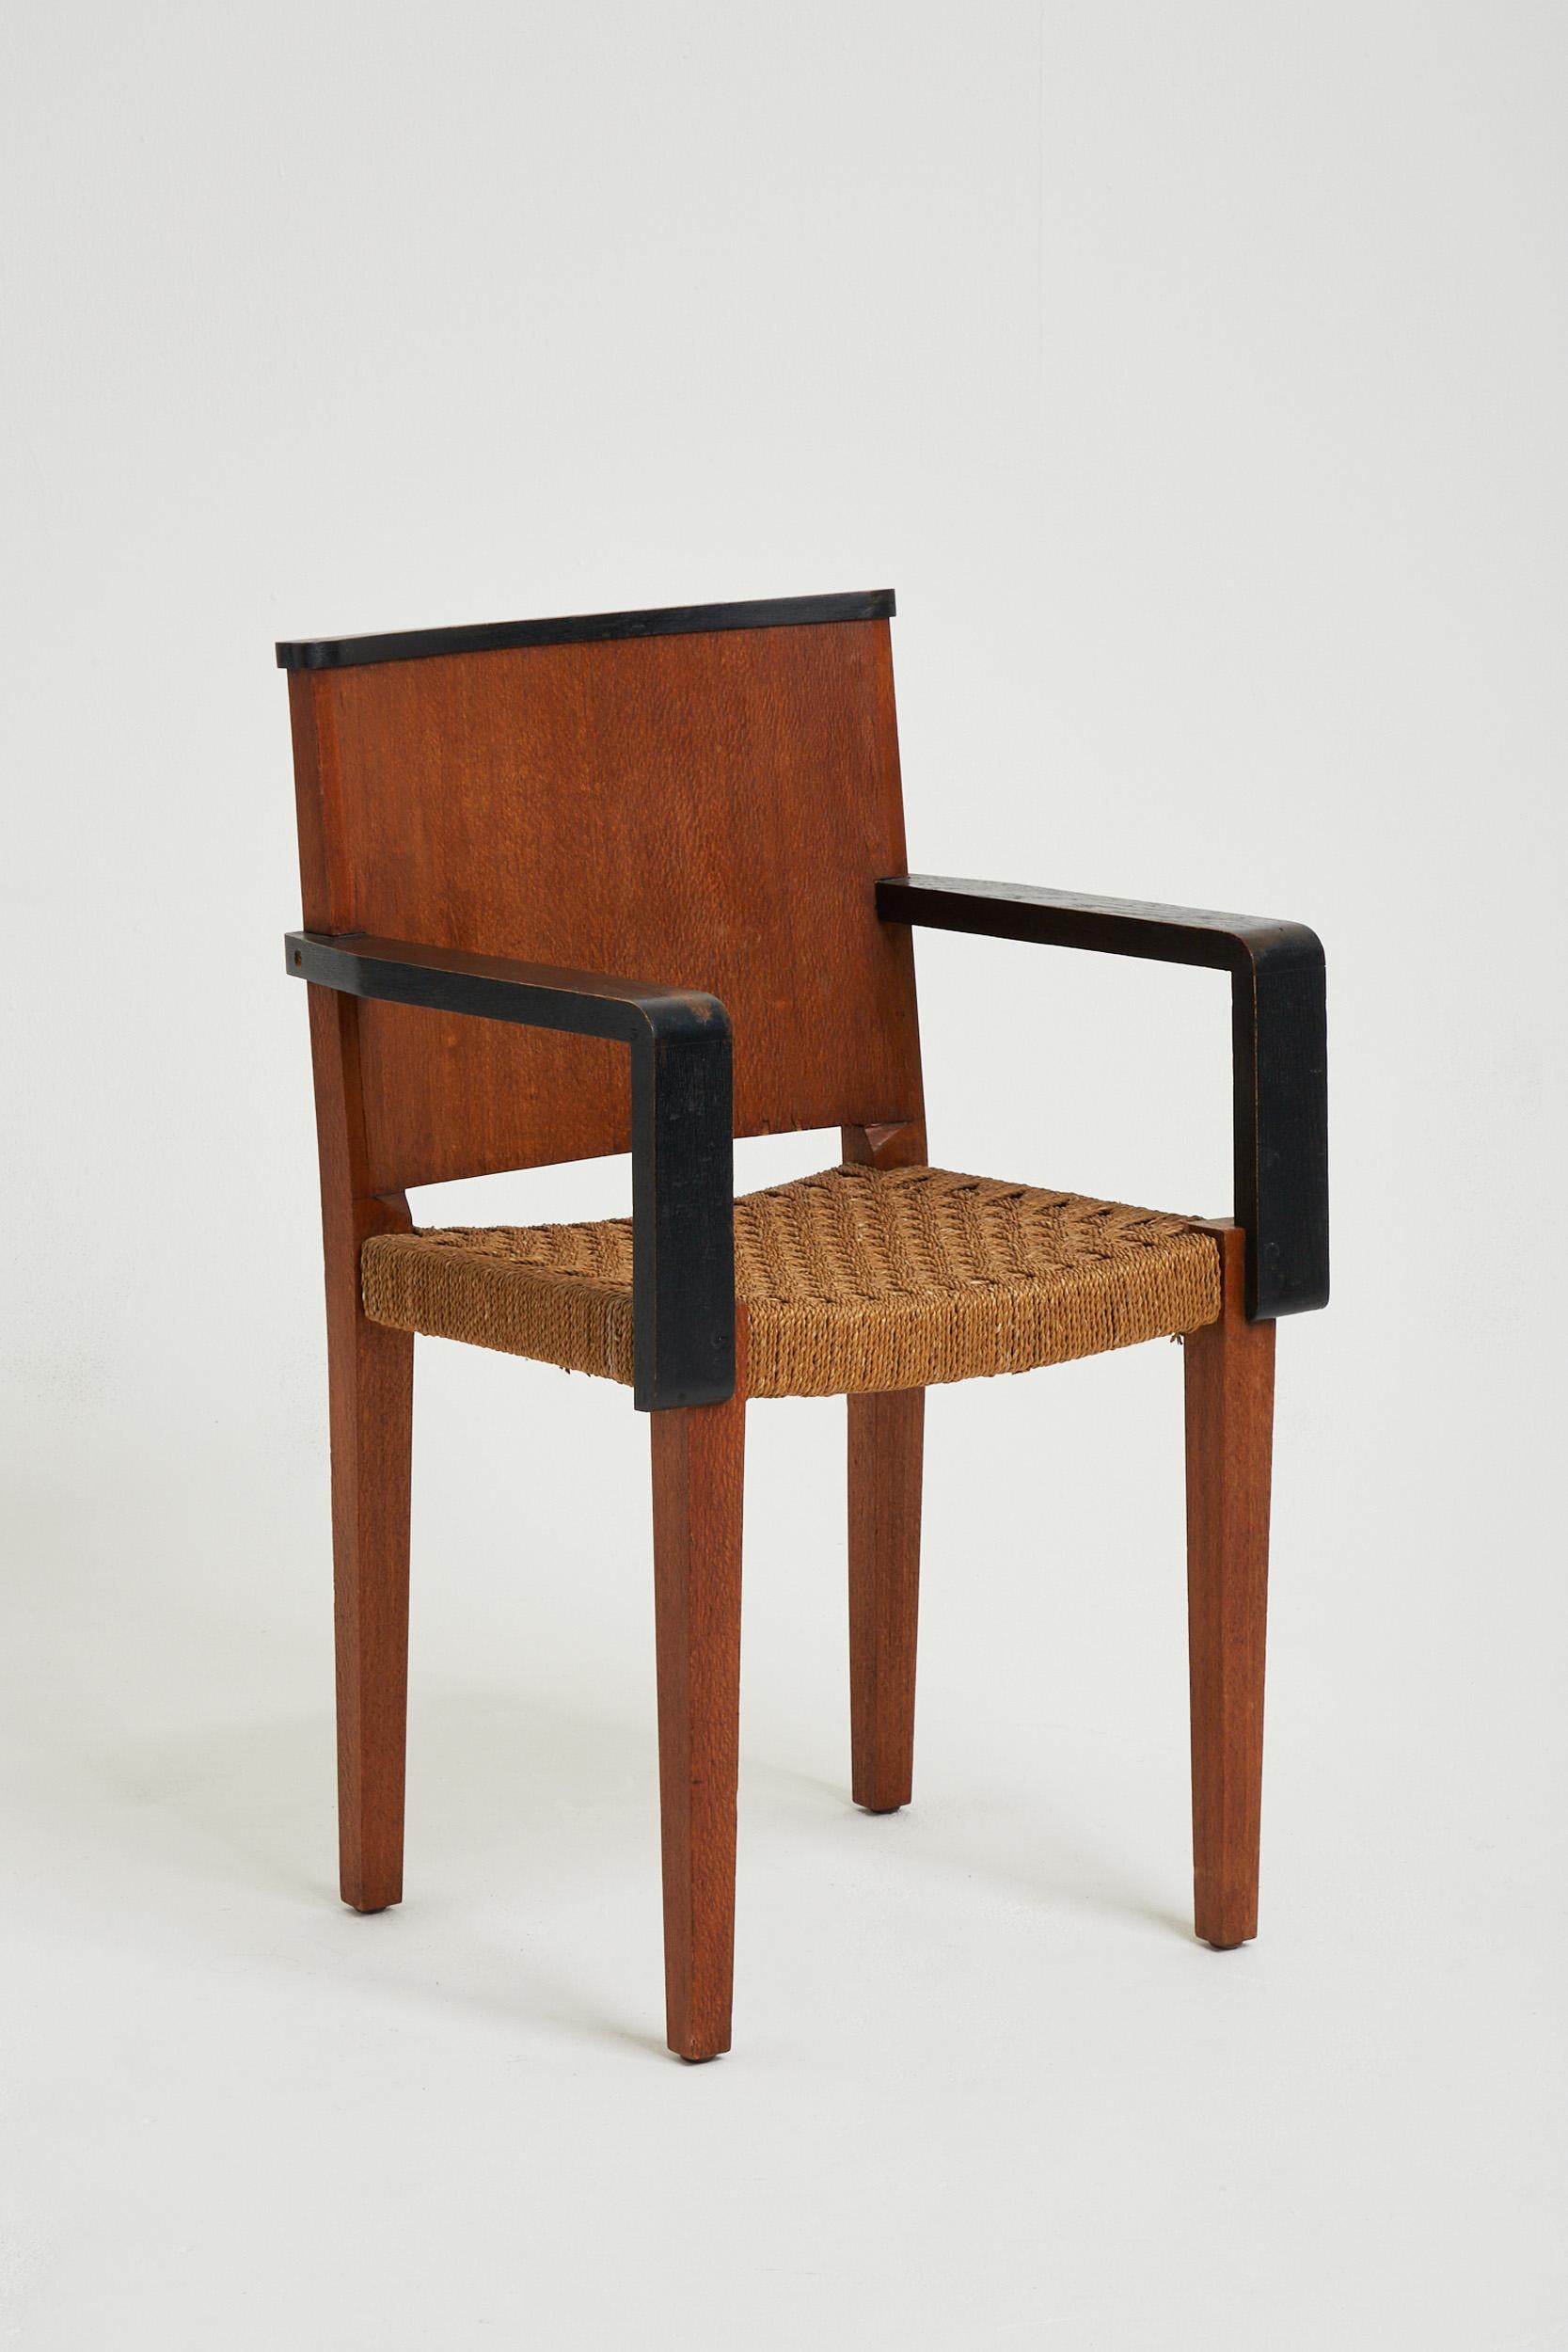 An oak and rope seat armchair
France, Circa 1950.